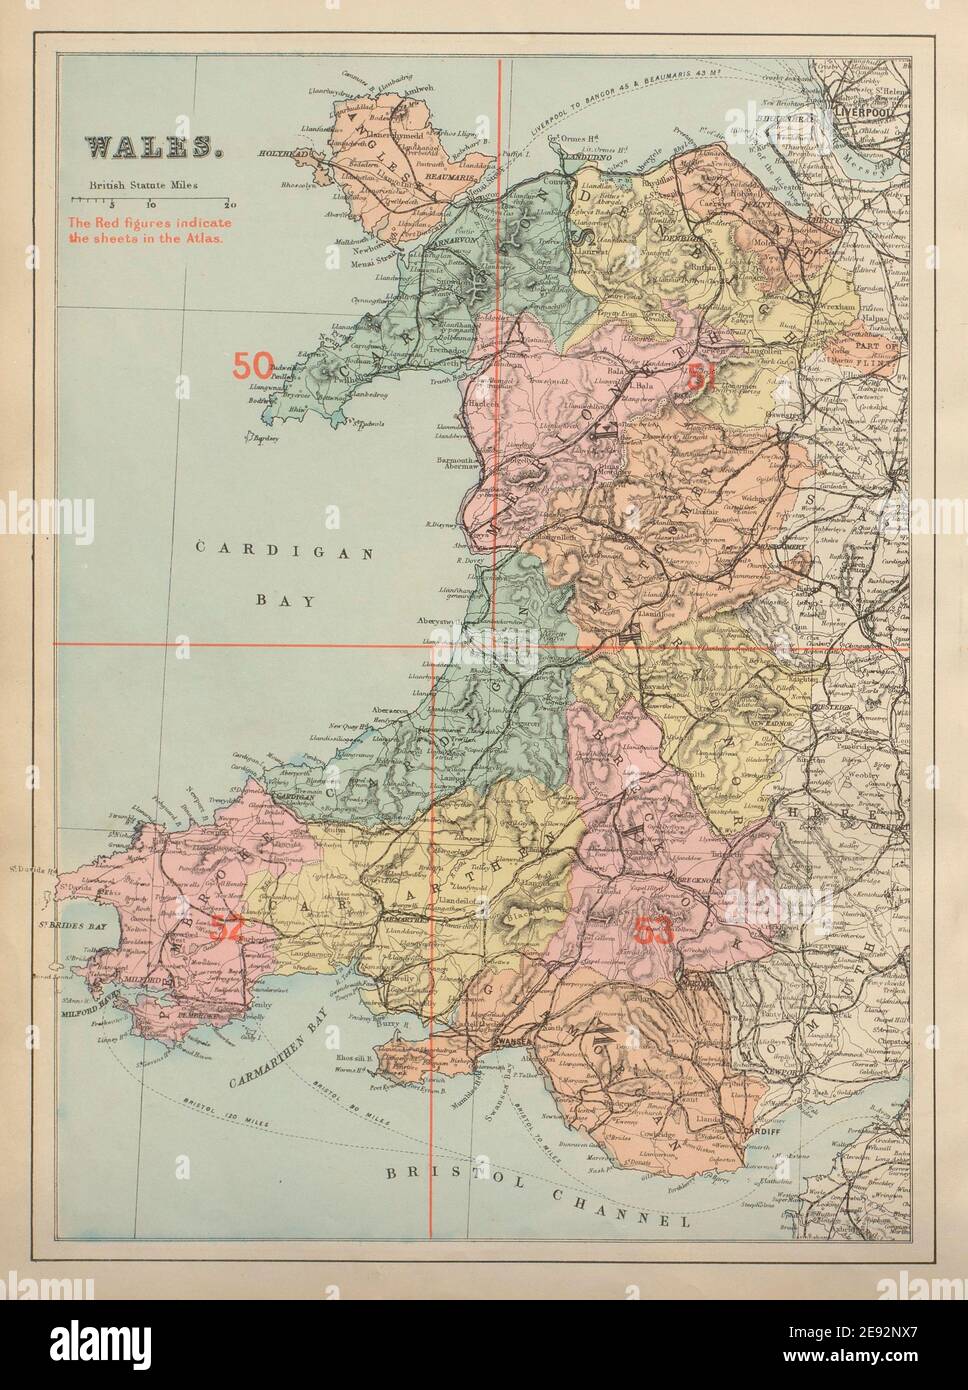 WALES antique index map by GW BACON 1885 old vintage plan chart Stock Photo